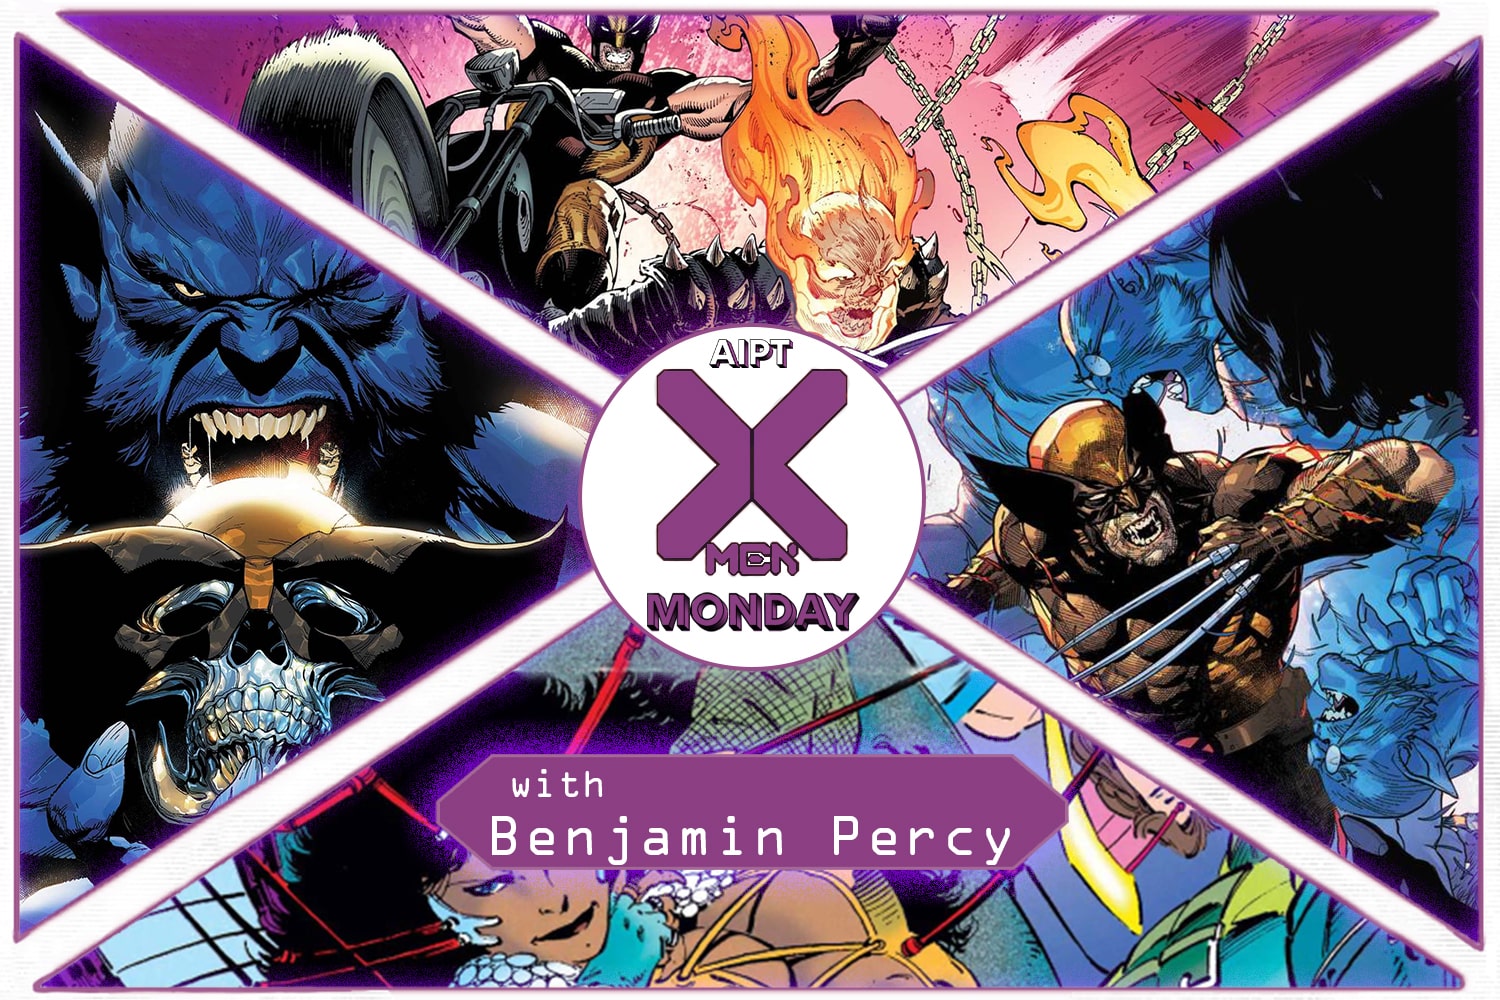 X-Men Monday #189 - Benjamin Percy Talks 'X-Force', 'Wolverine', and 'Ghost Rider/Wolverine: Weapons of Vengeance'